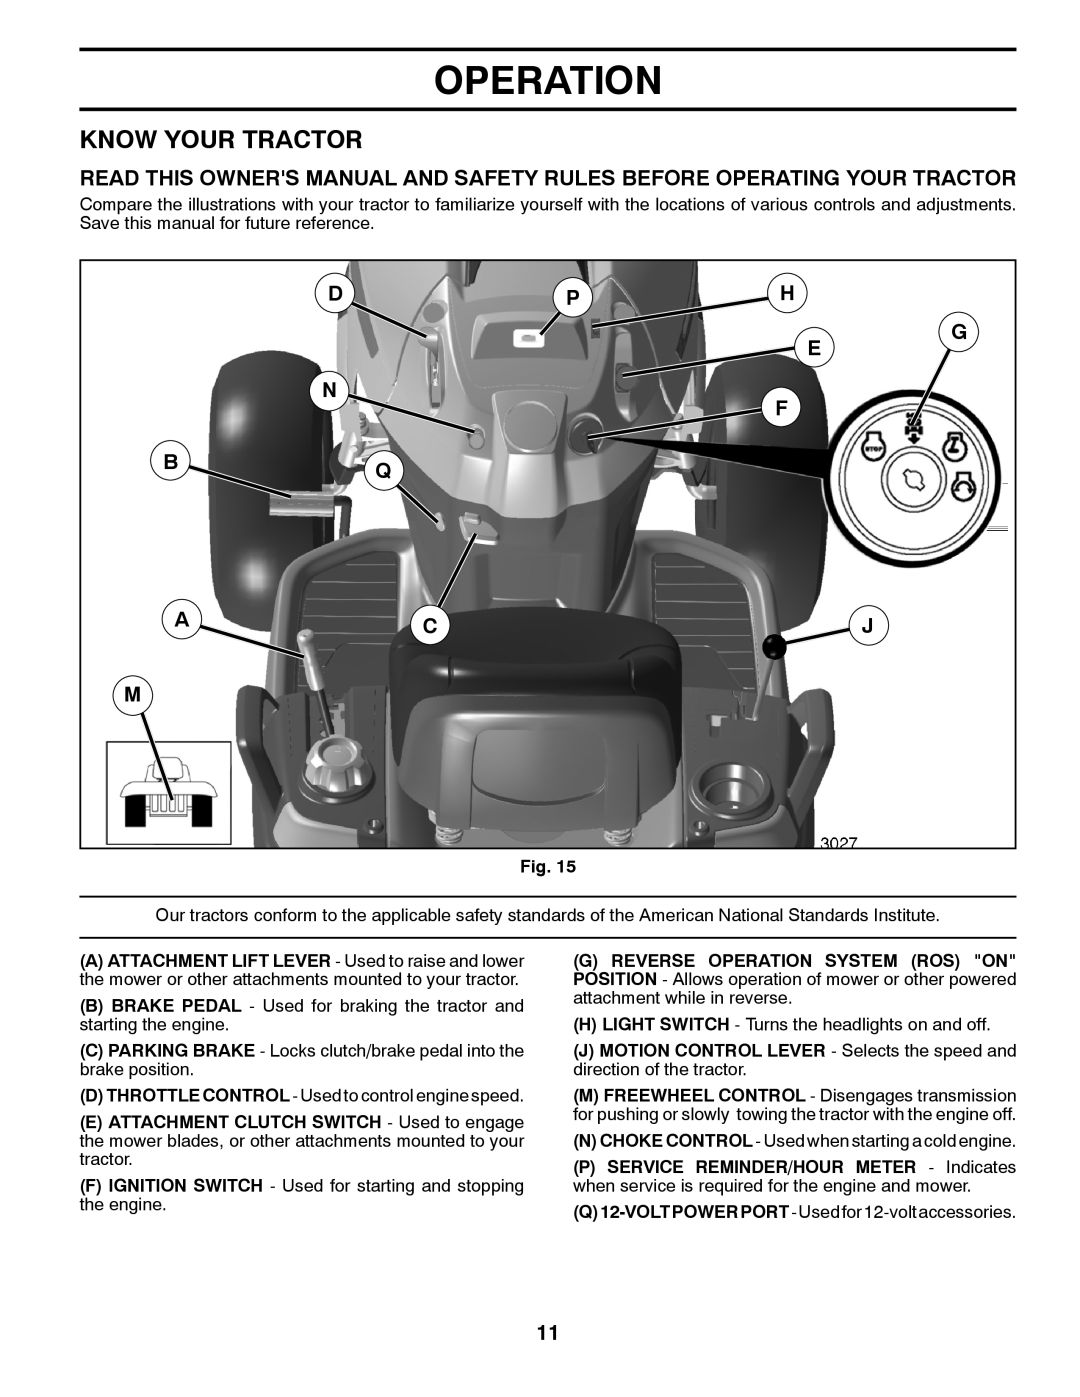 Husqvarna 532 44 00-55, 96045002800 owner manual Know Your Tractor, Bq Ac J M, Operation 